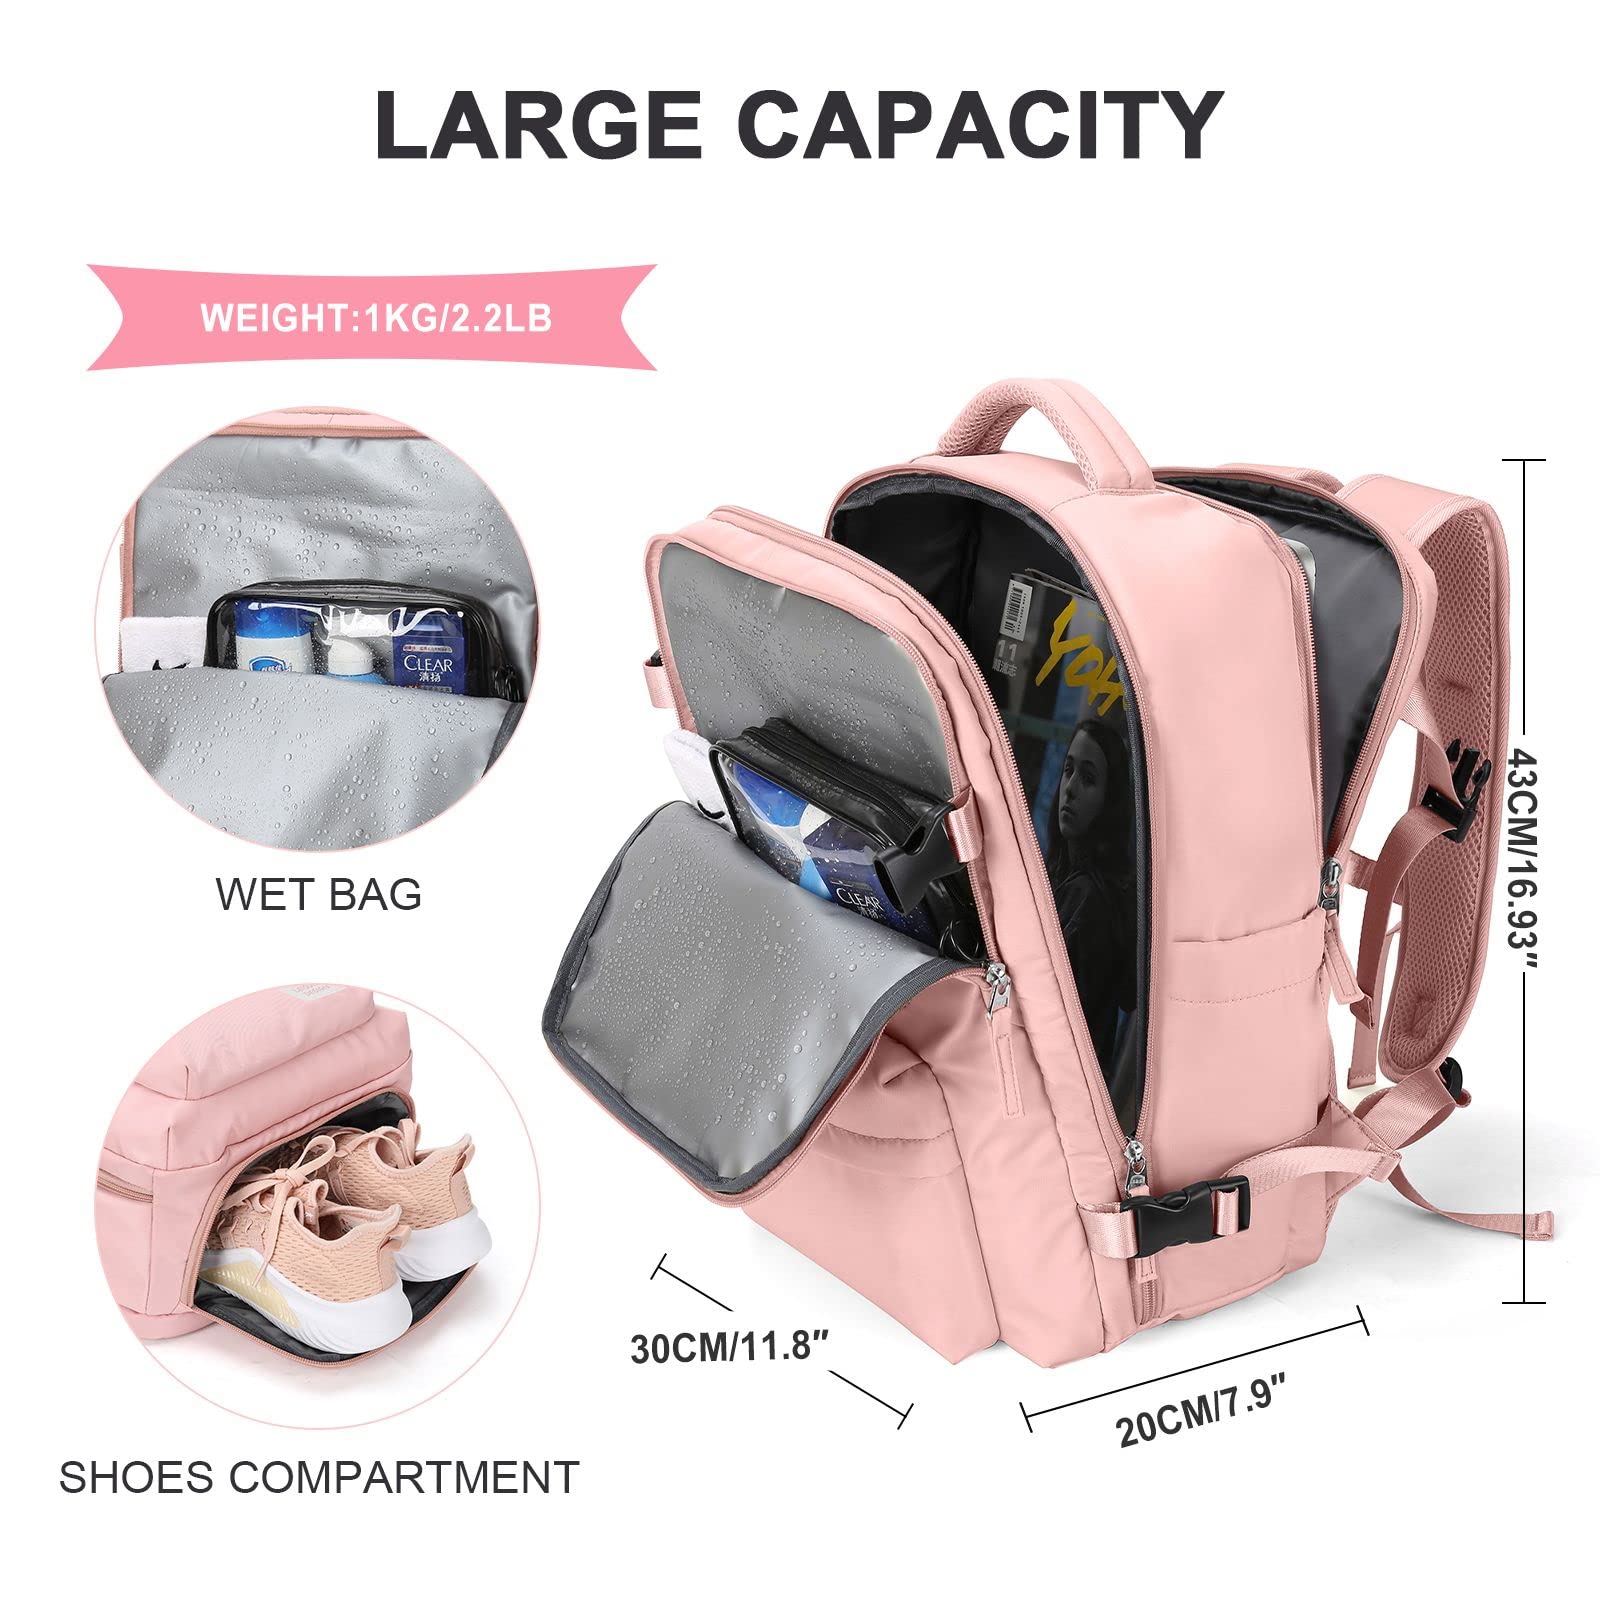 Large Travel Backpack Women, Carry On Backpack,Hiking Backpack Waterproof Outdoor Sports Rucksack Casual Daypack with Shoes Compartment, Pink